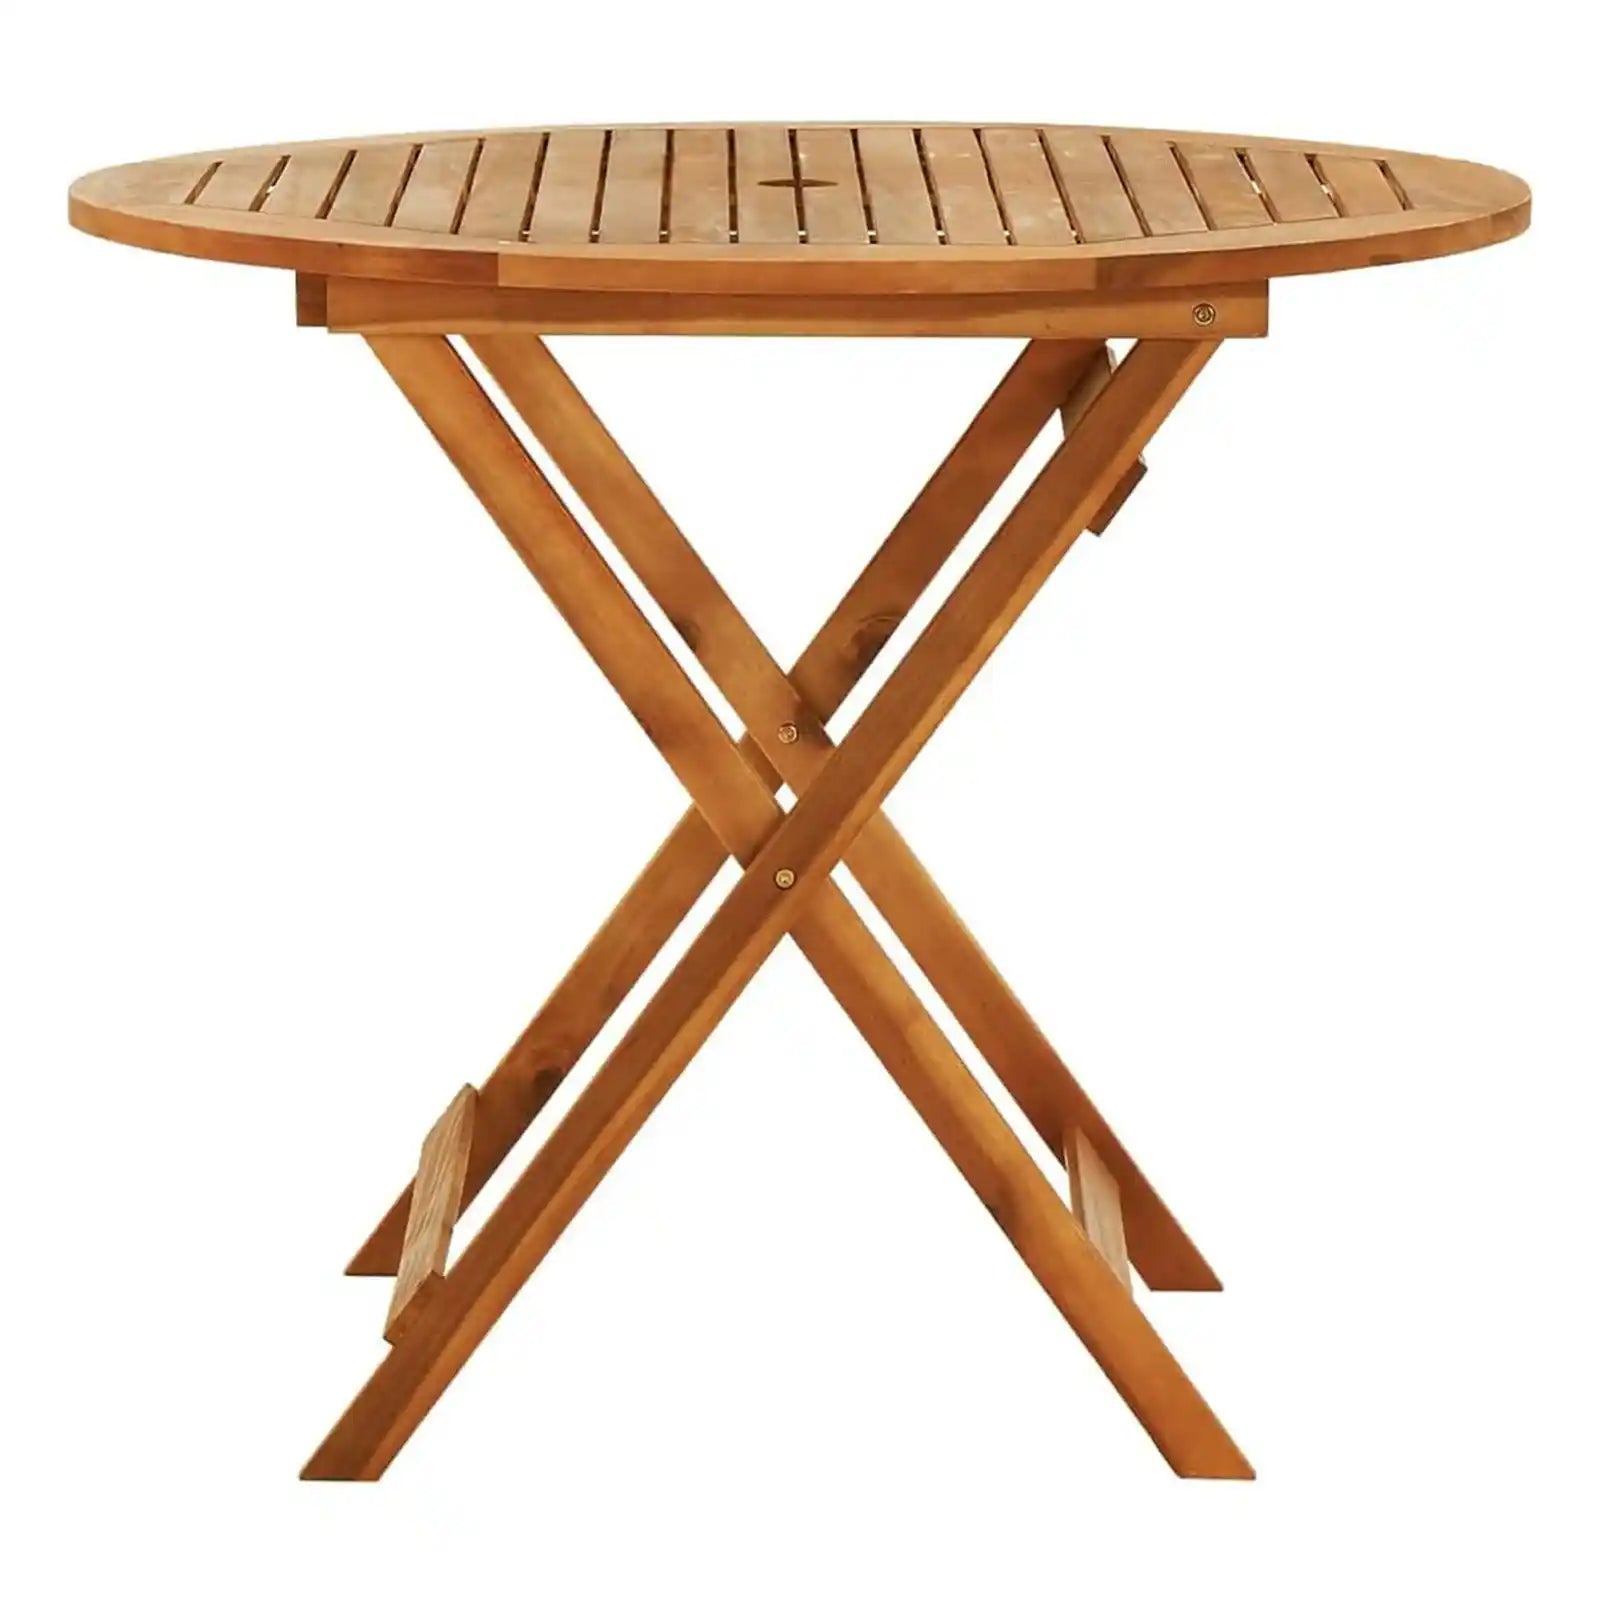 Outdoor Wood Dining Table, Folding Patio Table with Umbrella Hole